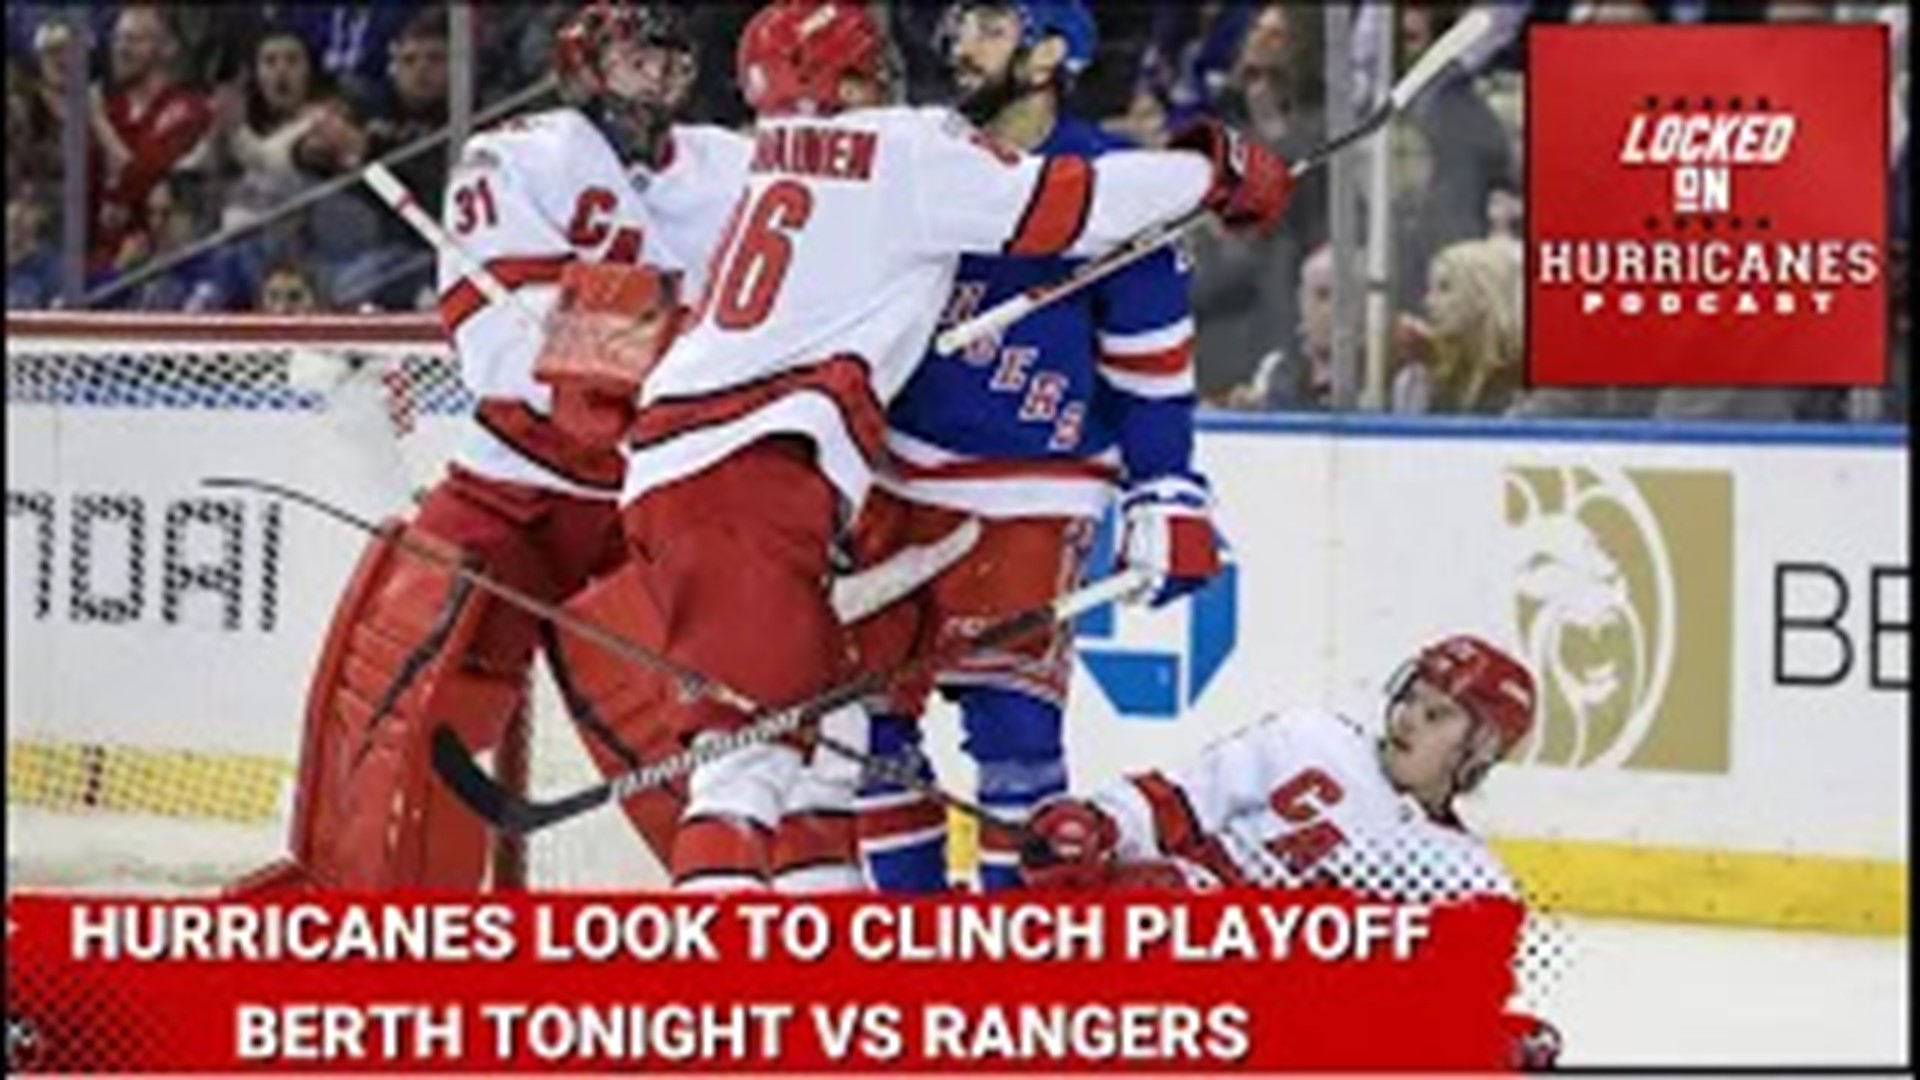 The Carolina Hurricanes are on the verge of clinching their 5th straight trip to the playoffs. That and more on Locked On Hurricanes